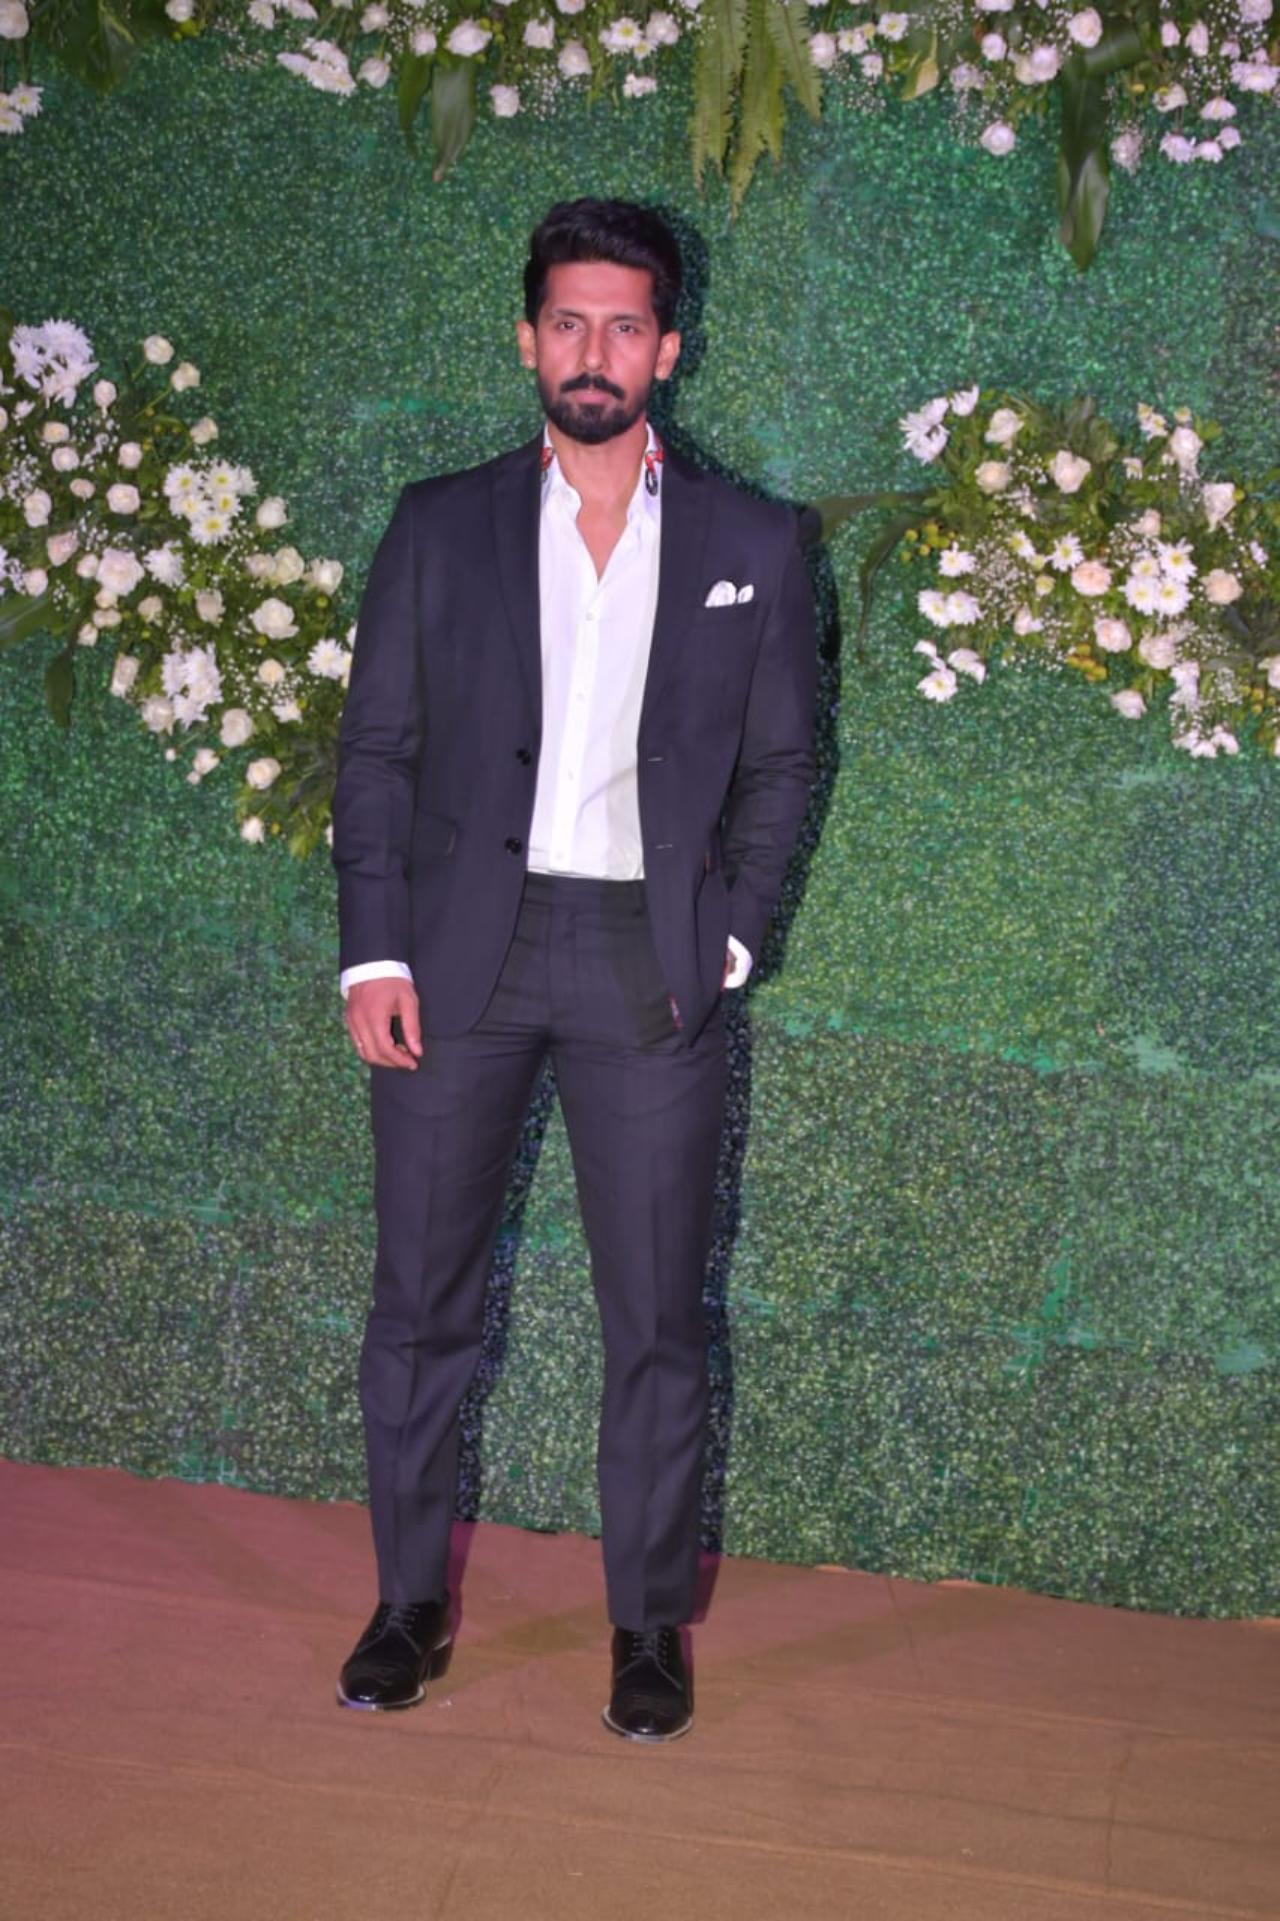 Actor Ravi Dubey looked suave in a black suit for the reception